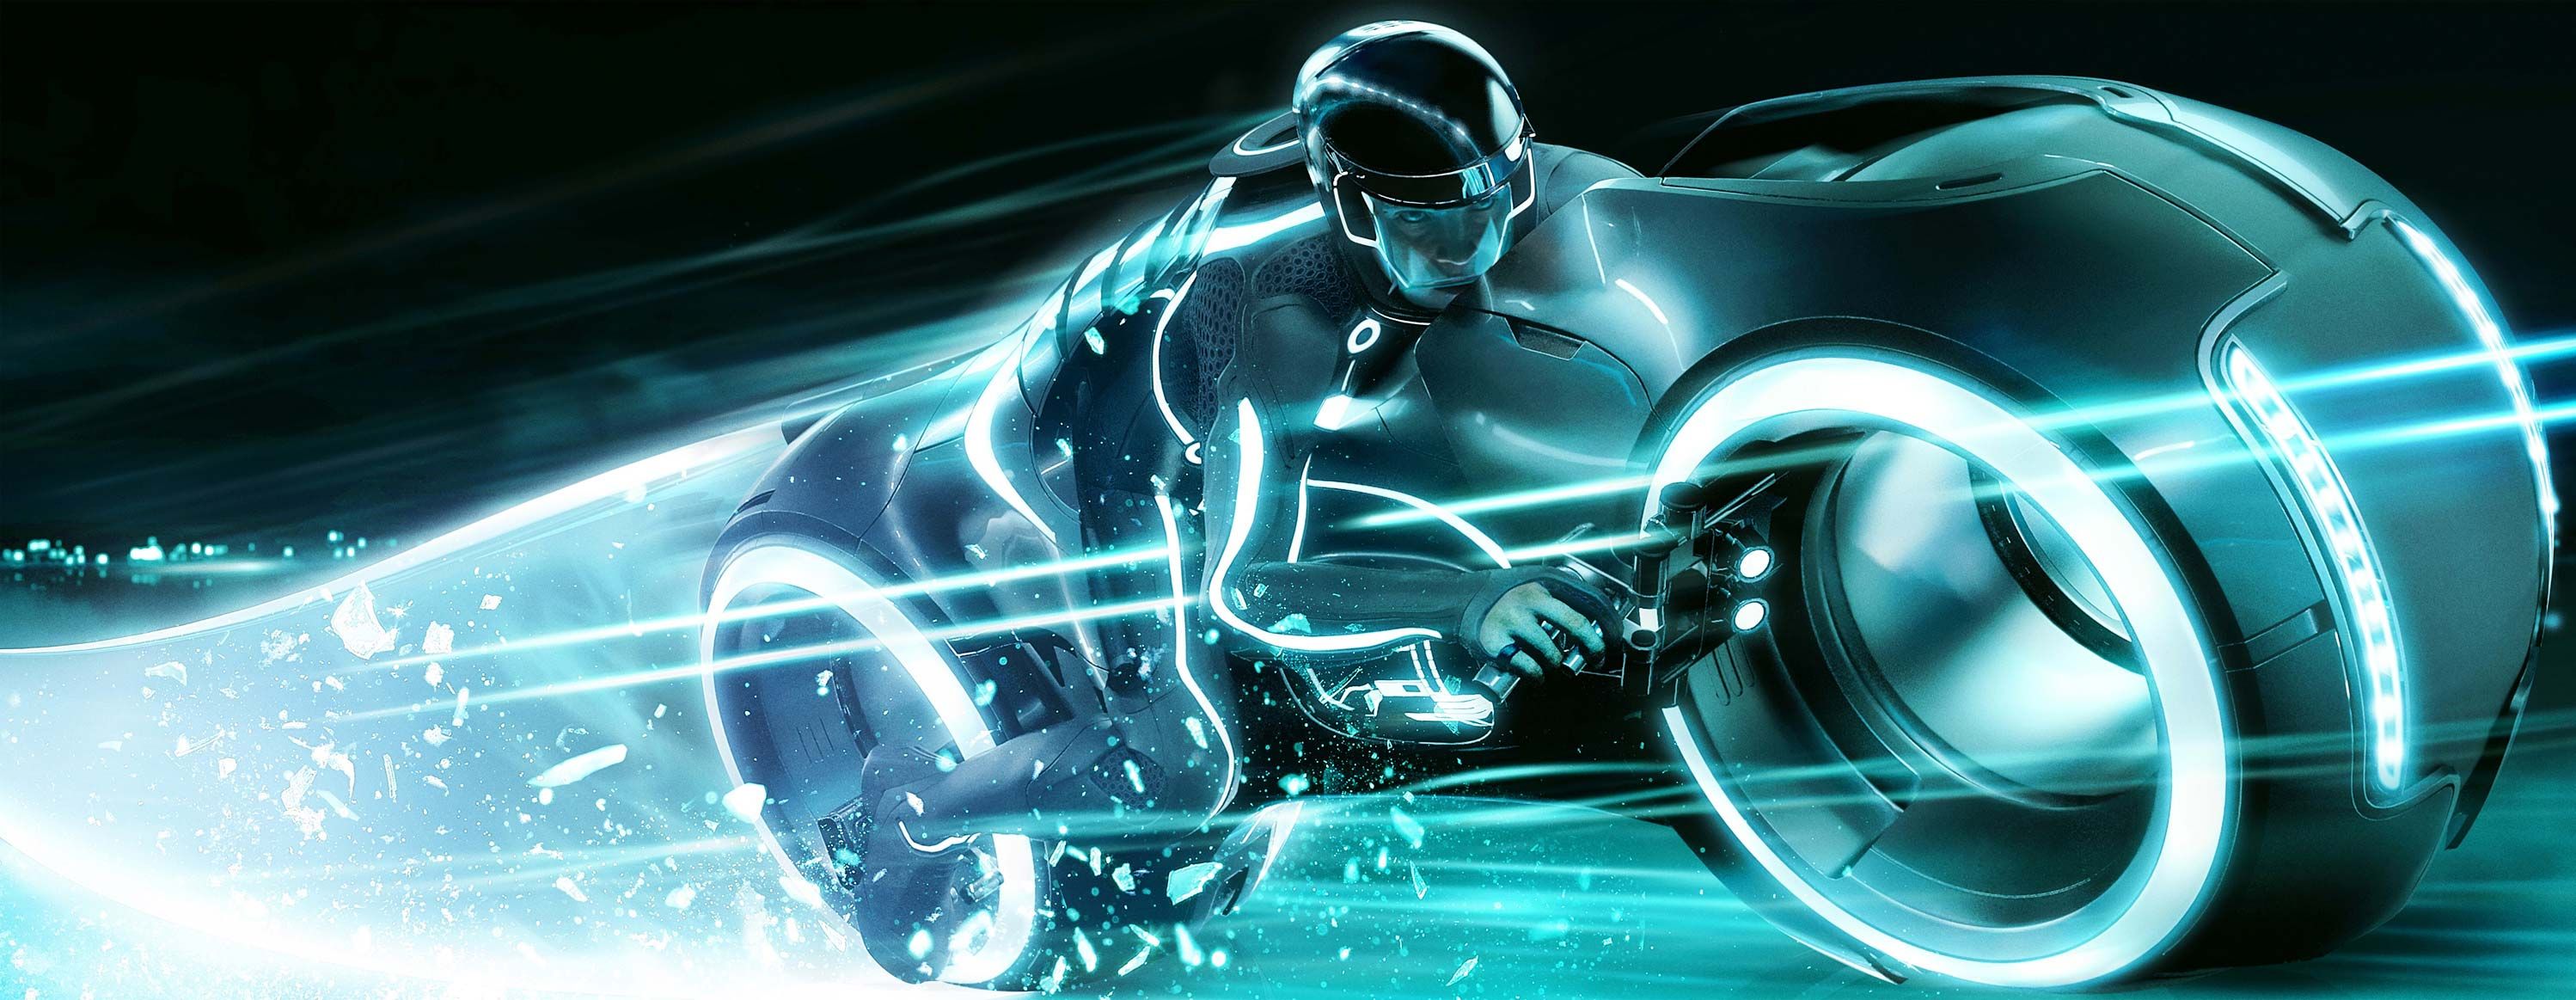 Tron lightcycle: Pretend you don't want it. Go on